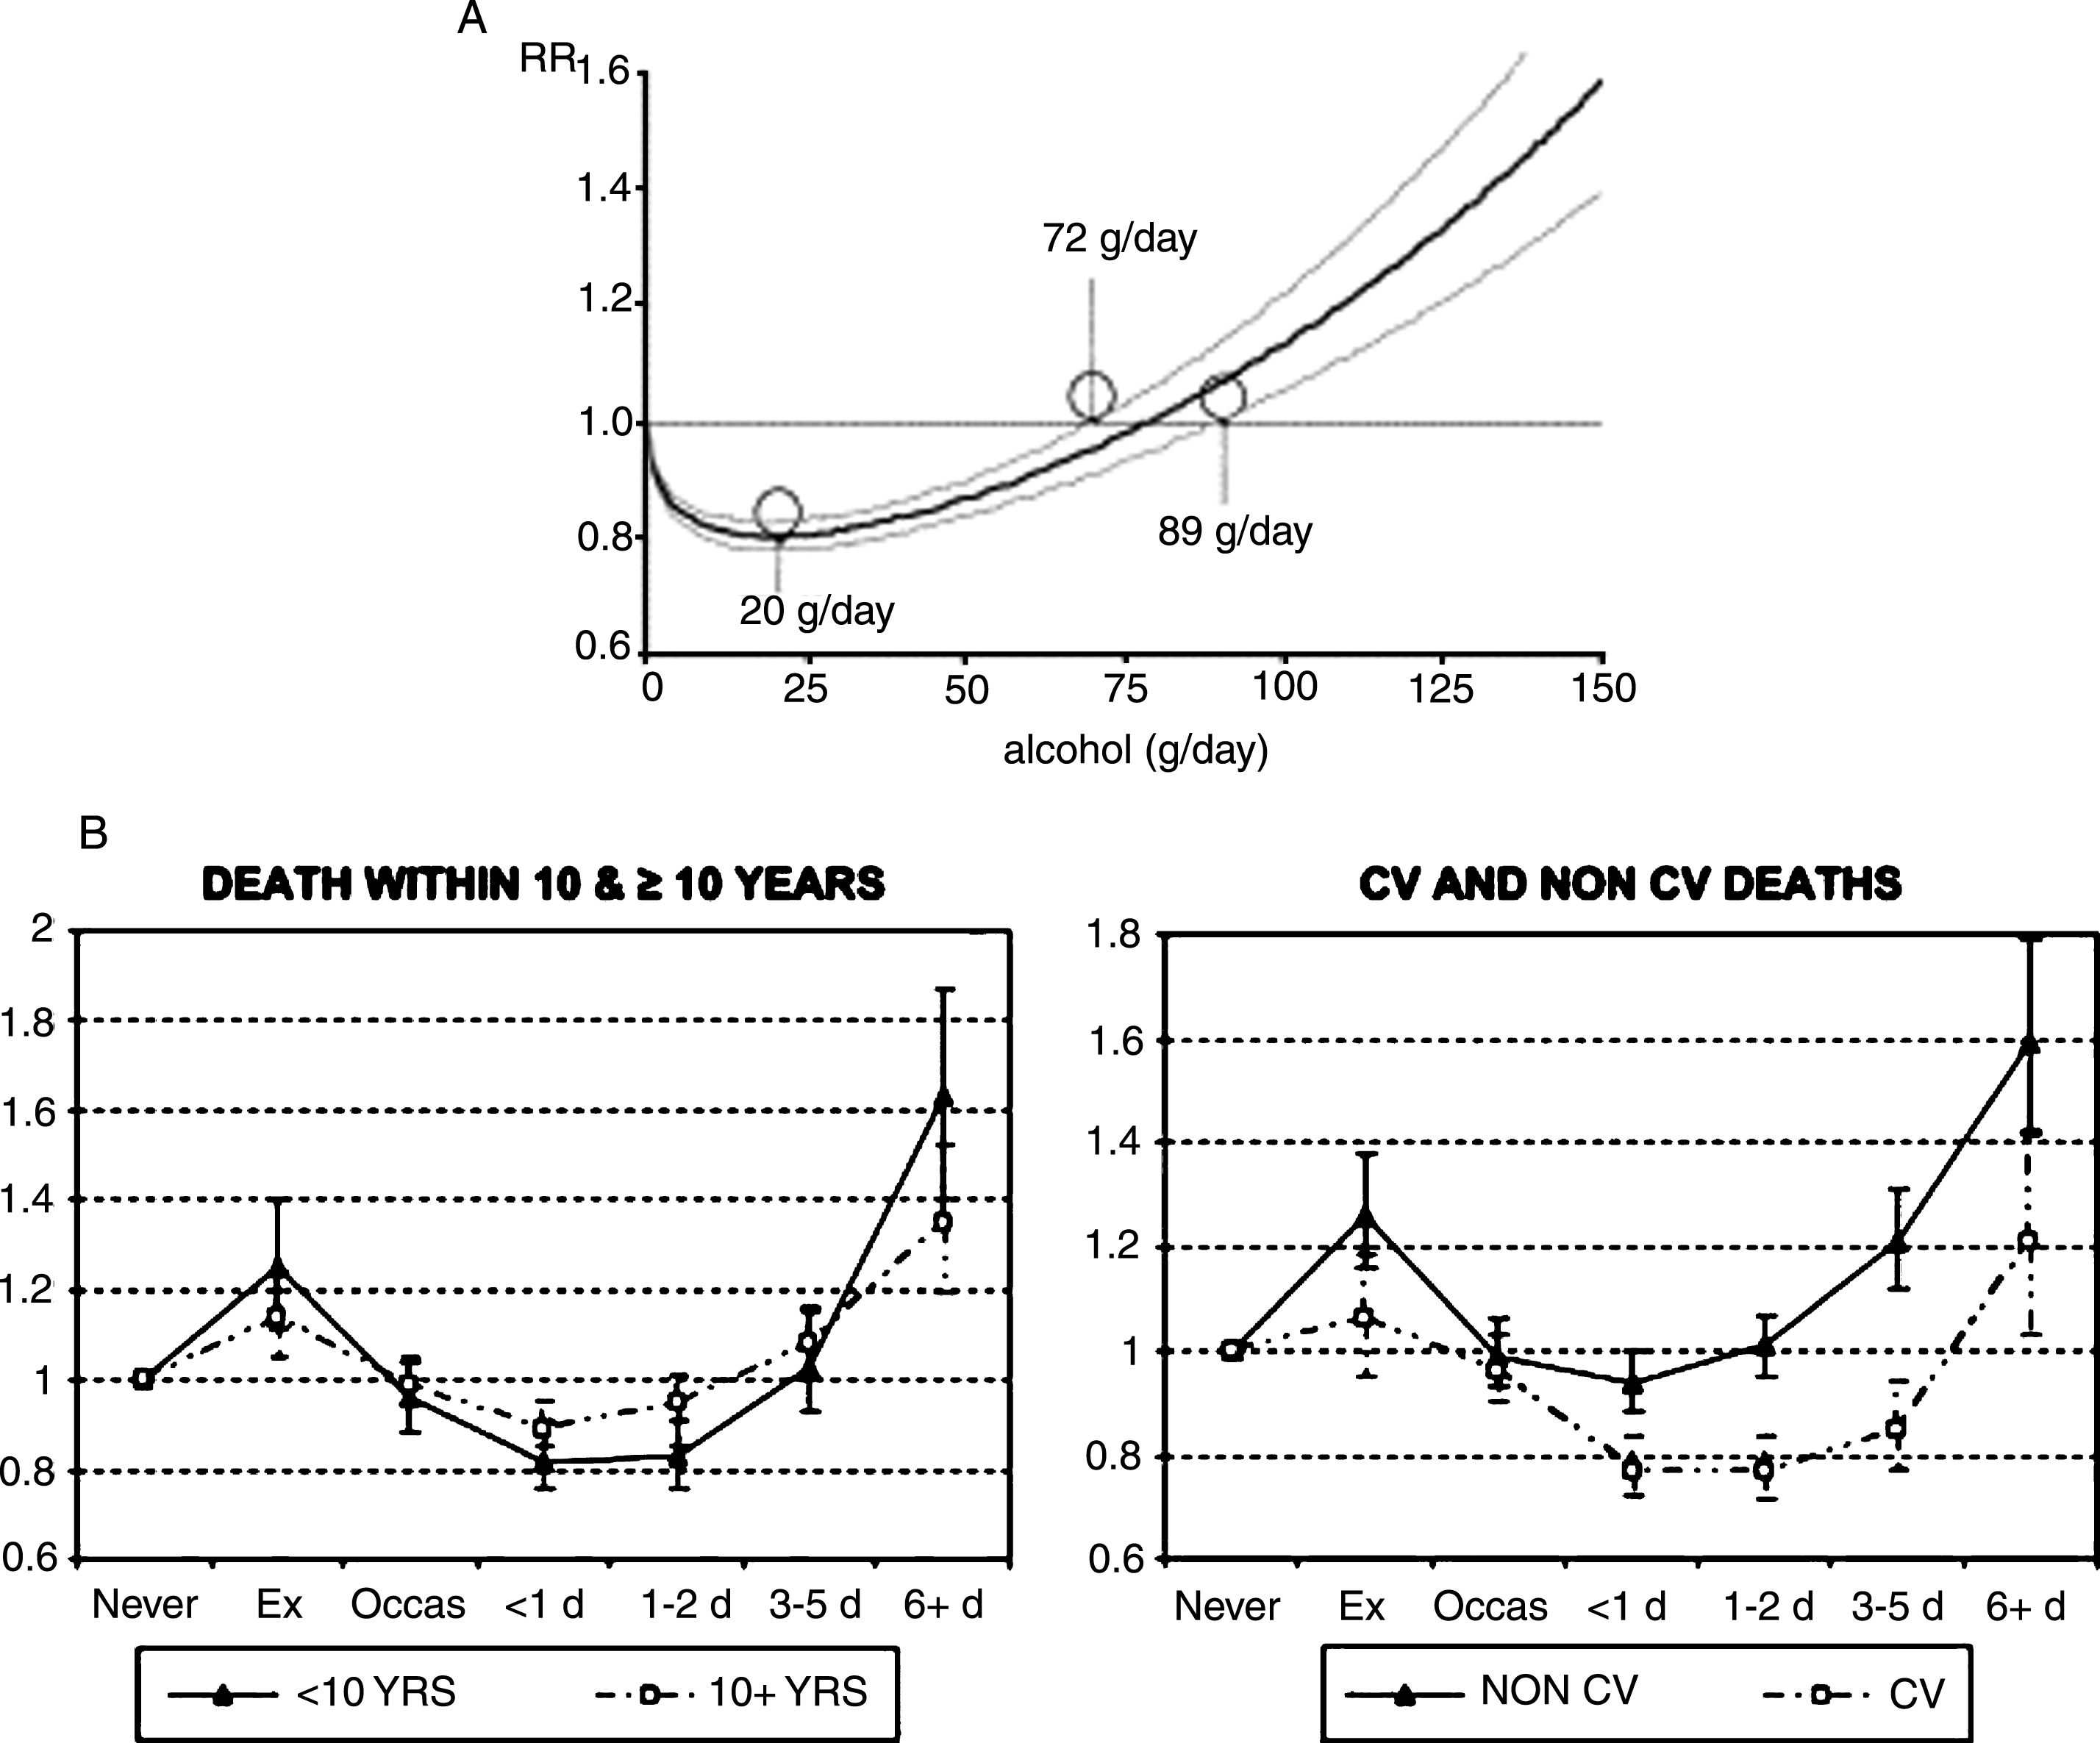 A) J-shaped curve from meta-analysis by Corrao et al. 2004. Relative risk function and corresponding 95% confidence intervals describing the dose-response relationship between alcohol consumption and the risk of coronary heart disease. From: Corrao G, Bagnardi V, Zambon A, La Vecchia C. 2004. A meta-analysis of alcohol consumption and the risk of 15 diseases. Prev Med. 38(5):613-9. [41]. B) J-shaped curve from re-analysis of data by Klatsky and Udaltsova 2007 [42]. Fully adjusted model for interval between baseline data and death (left hand side figure) where all relations appear to become attenuated with passage of time. This probably is due to a general reduction of alcohol intake in the population, resulting in less harm from heavy drinking and less benefit from light-moderate drinking. Fully adjusted model for cardiovascular (CV) and non-cardiovascular (non-CV) deaths (right hand side figure).
